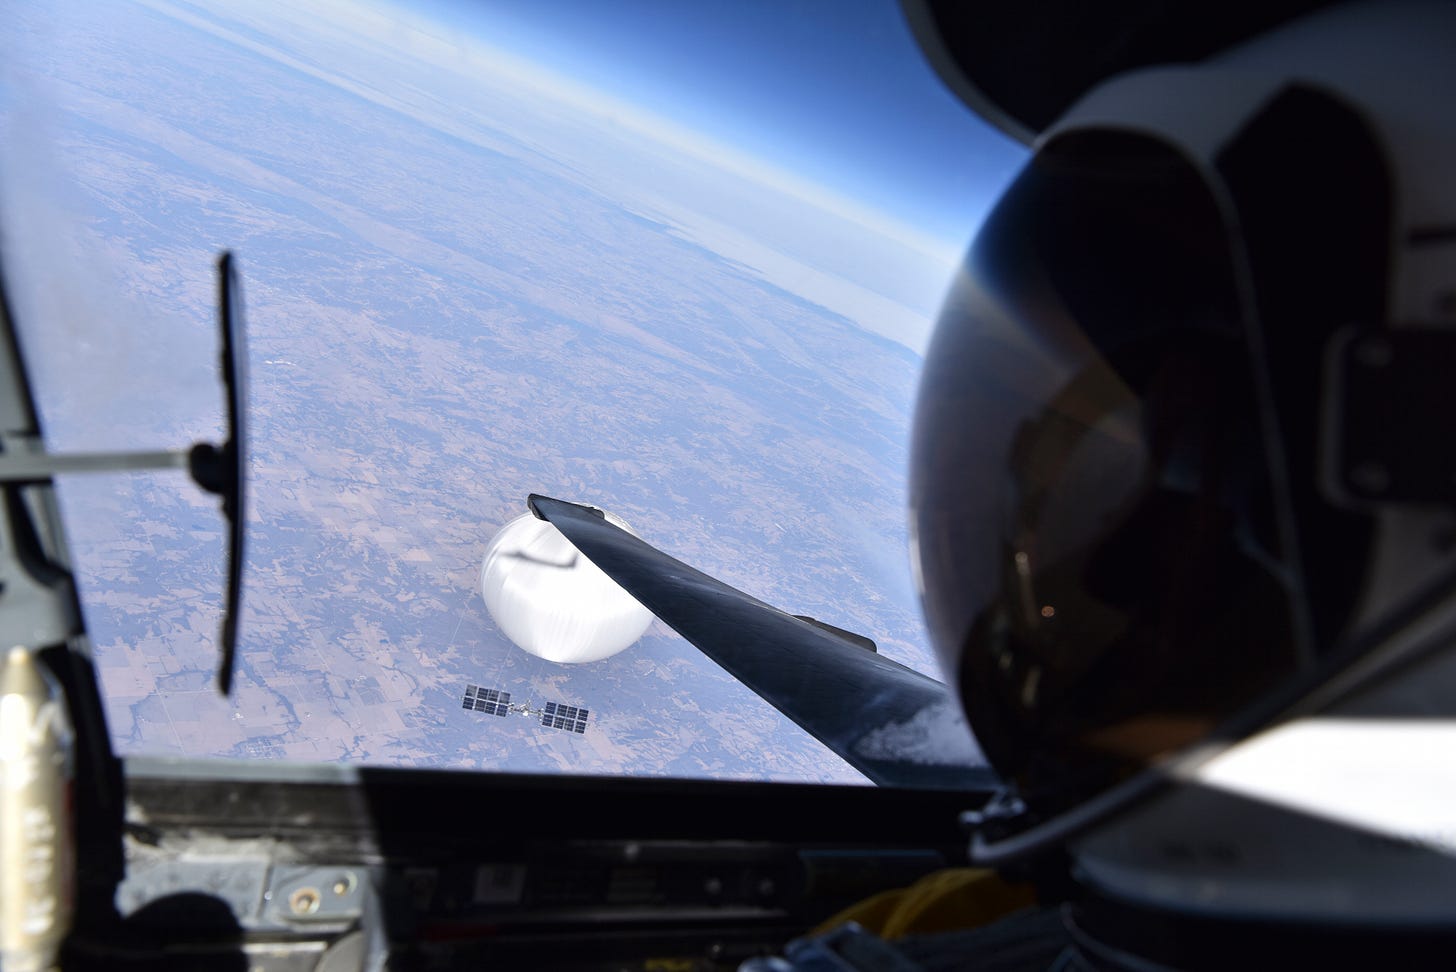 A U.S. Air Force pilot looked down at the suspected Chinese surveillance balloon as it hovered over the Central Continental United States February 3, 2023. Recovery efforts began shortly after the balloon was downed. (Photo courtesy of the Department of Defense) 